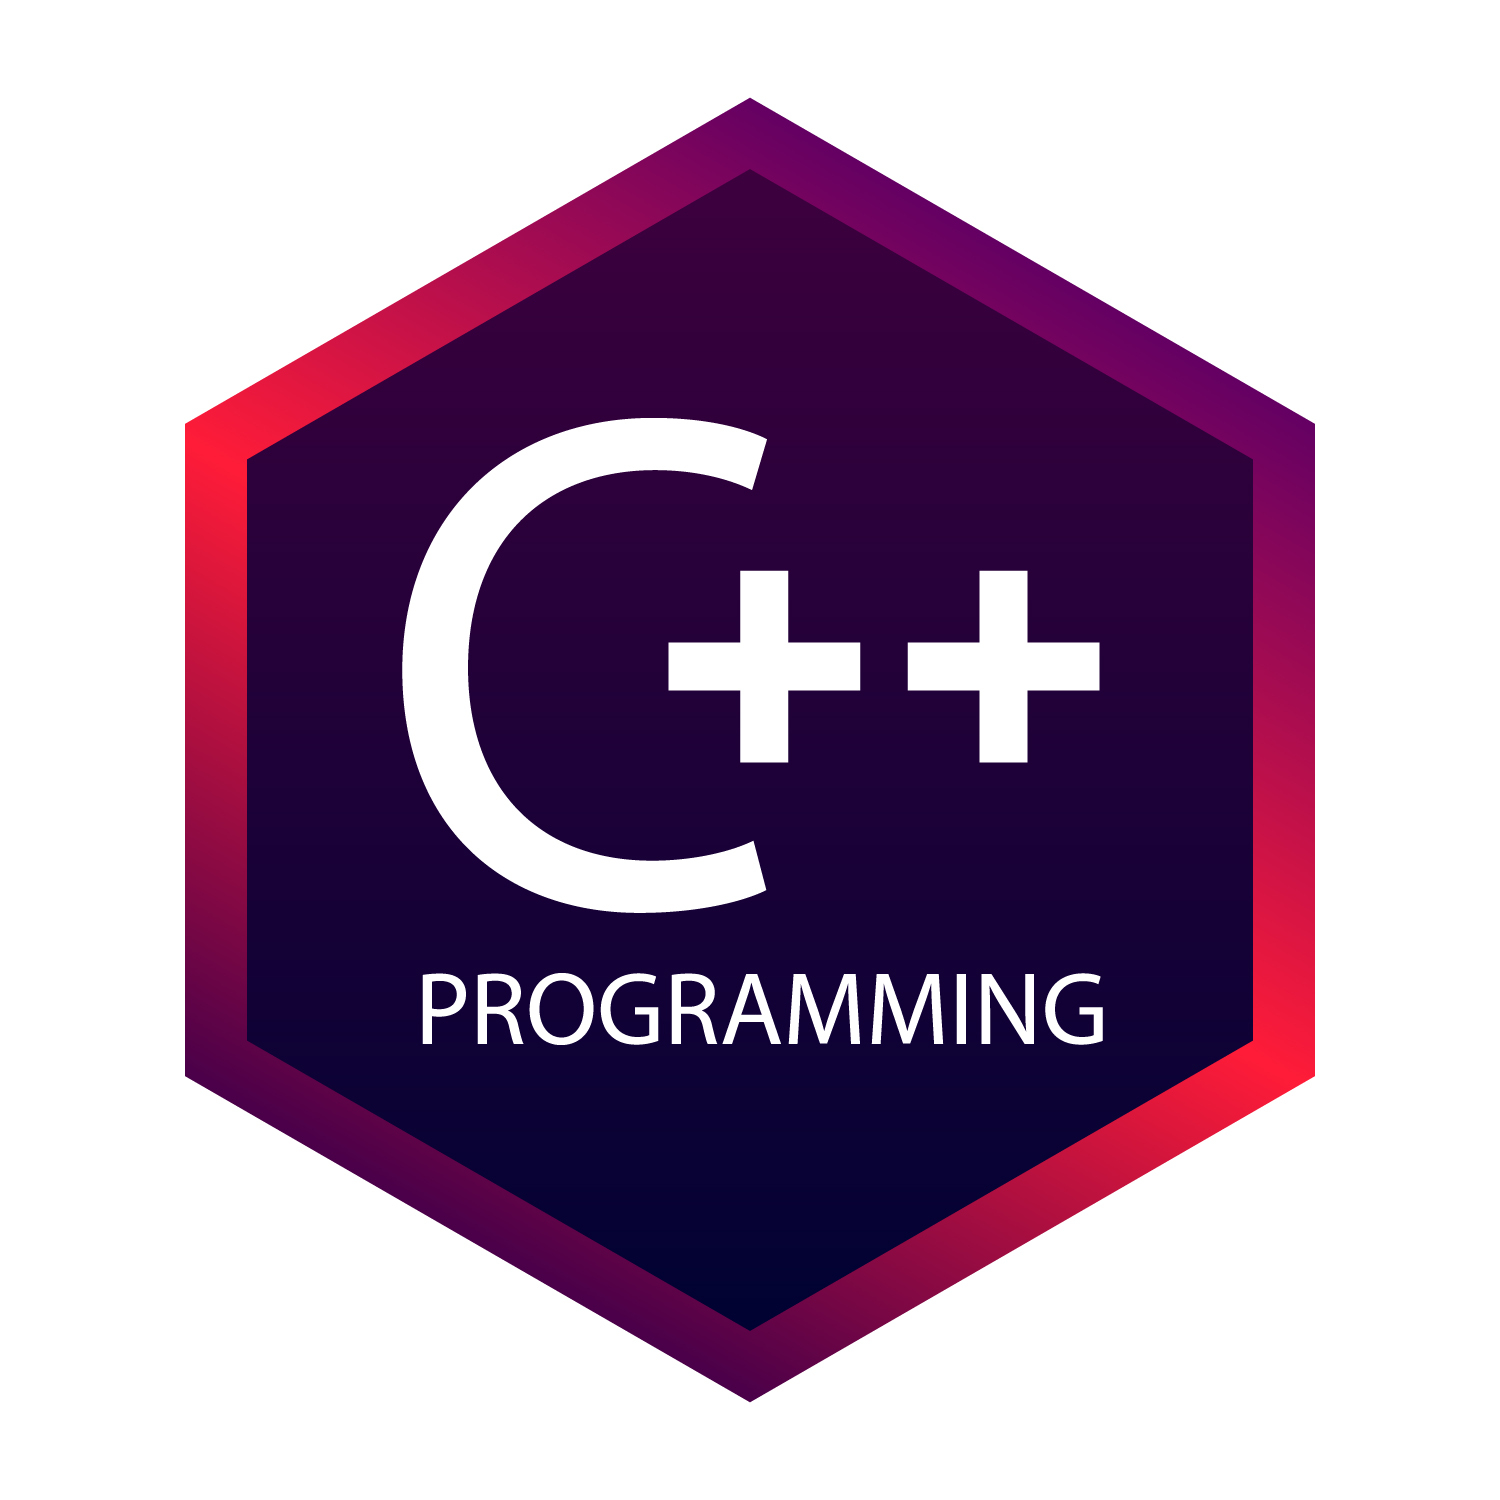 Careers in STEM: Young Coders, The Basics of C++ Programming Language (5th -9th Grade)
